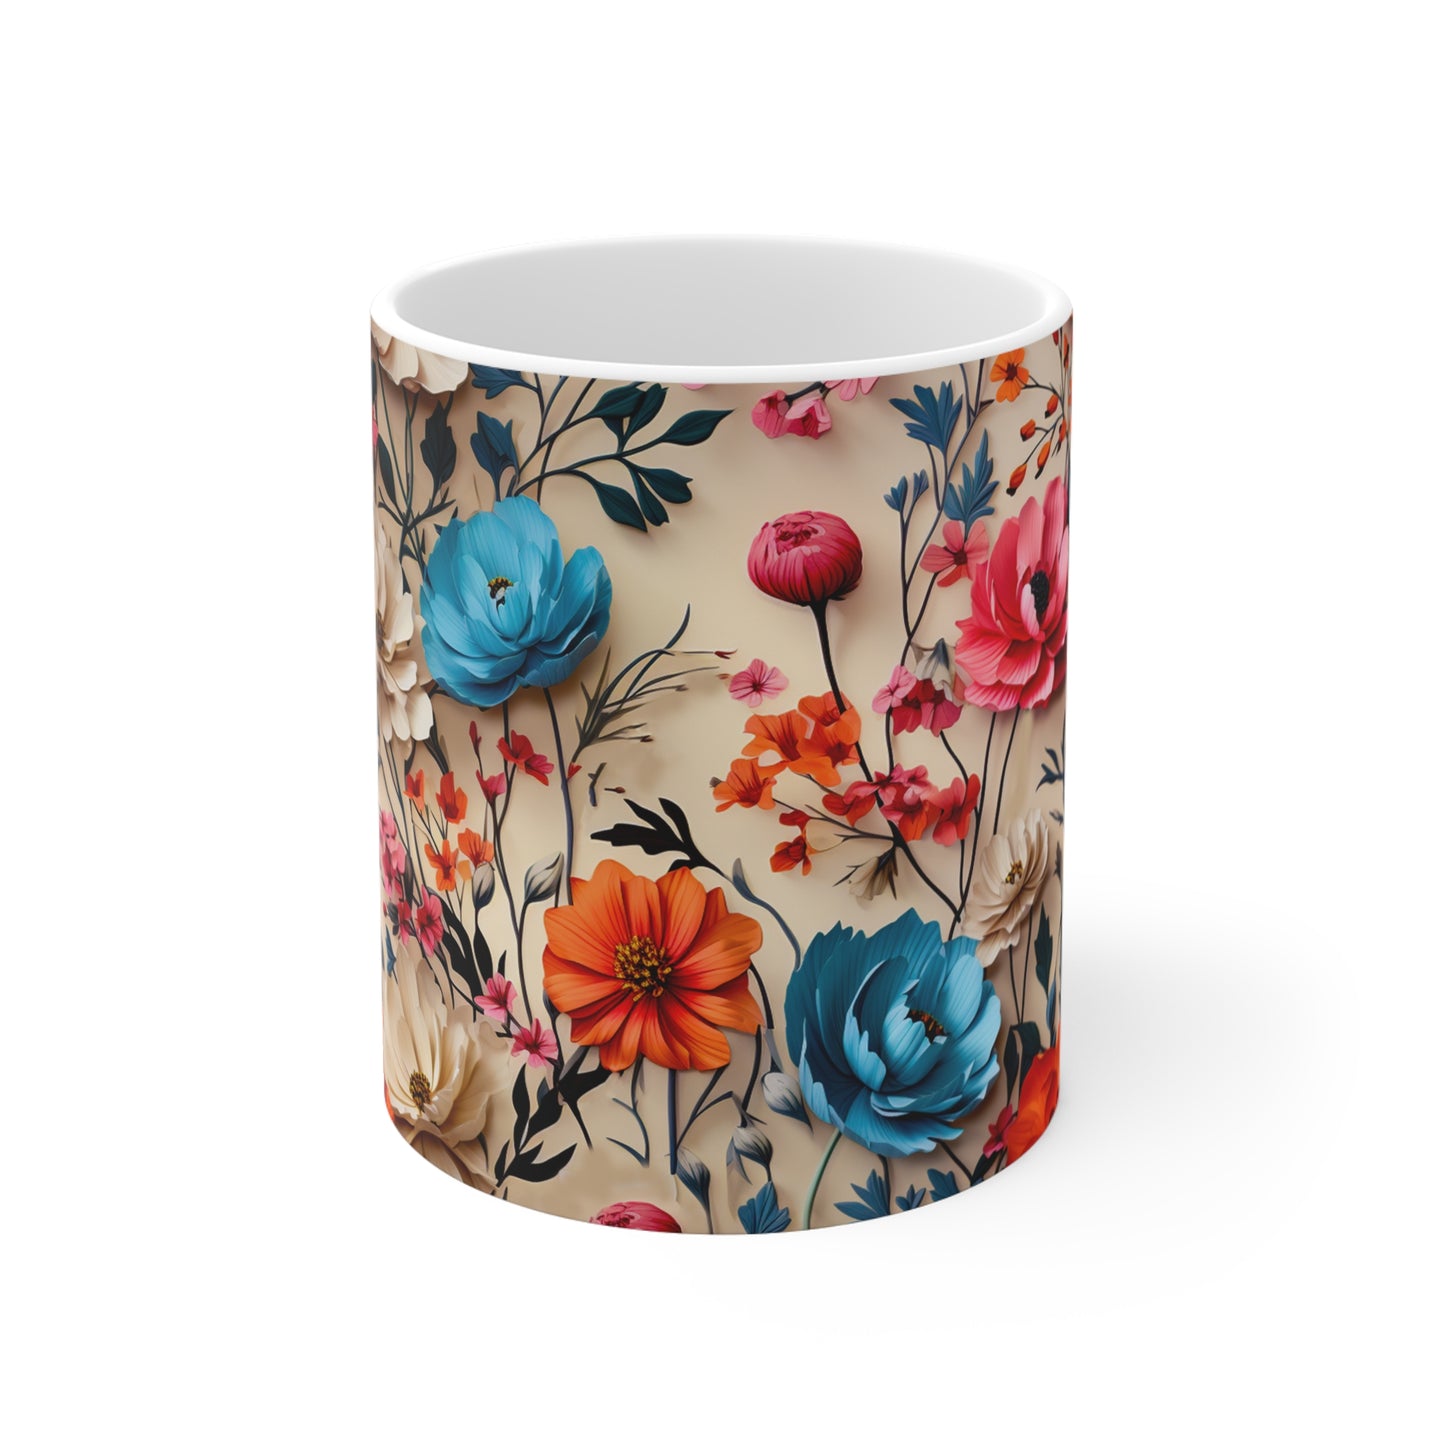 Vintage Floral Coffee Mug | Cottagecore & Boho Chic Mugs (11 oz.) from The Curated Goose